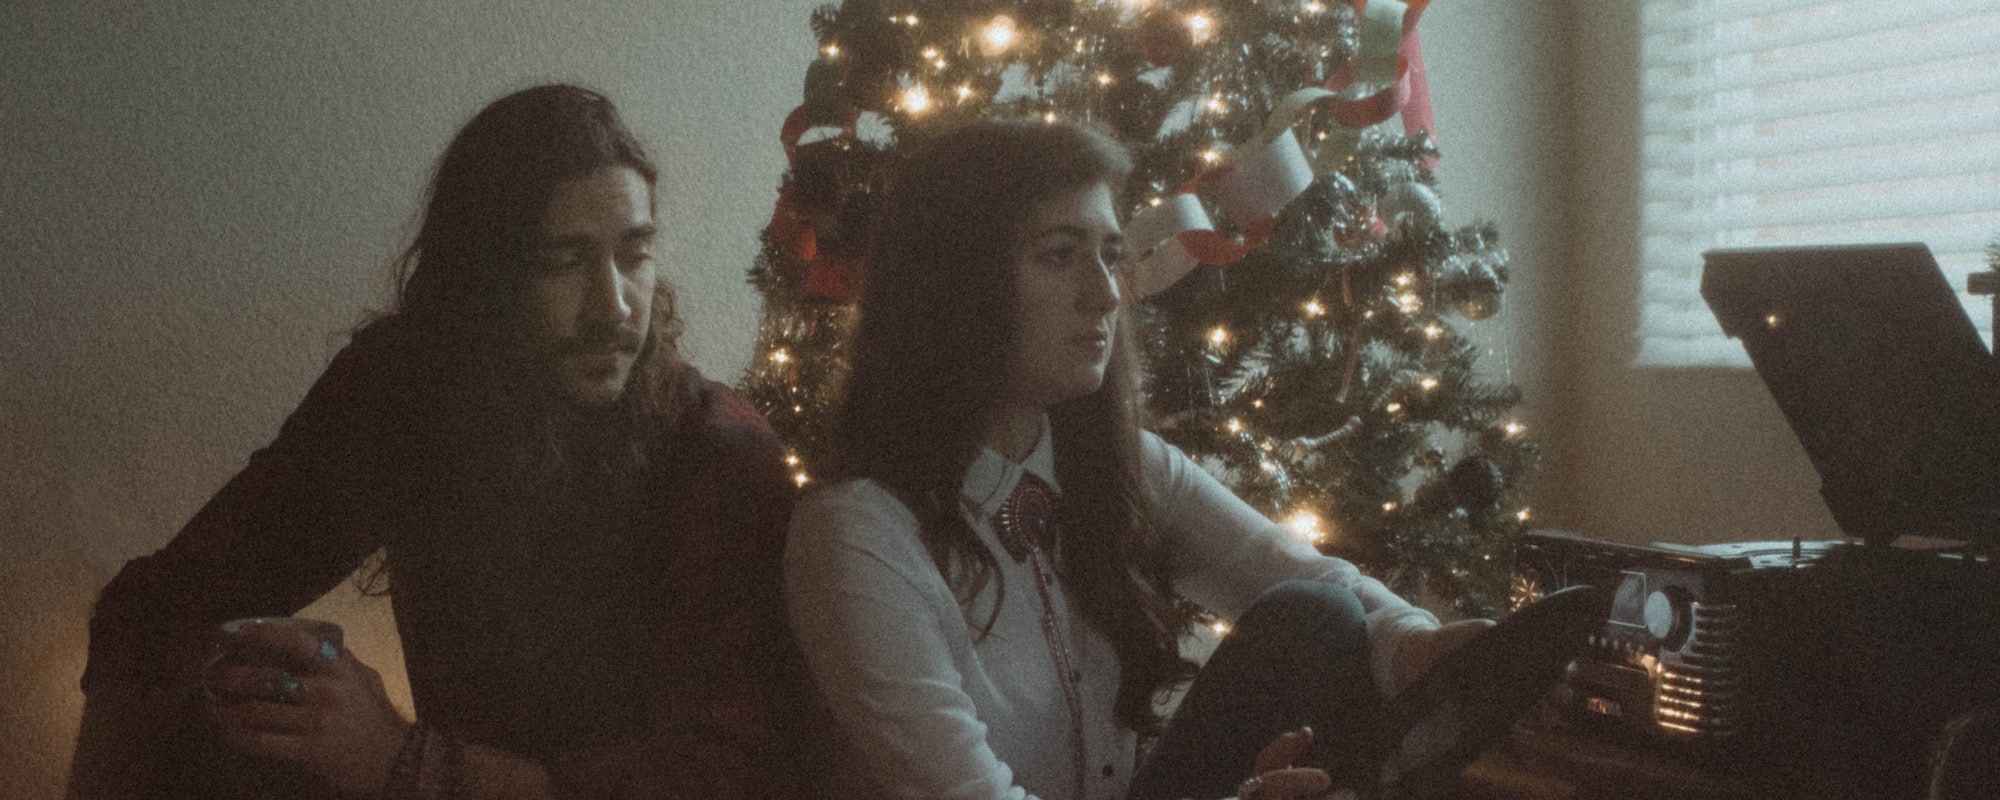 The Voice’s Van Andrew and Tori Miller Collaborate on Haunting Carol “A Merry Little Christmas”